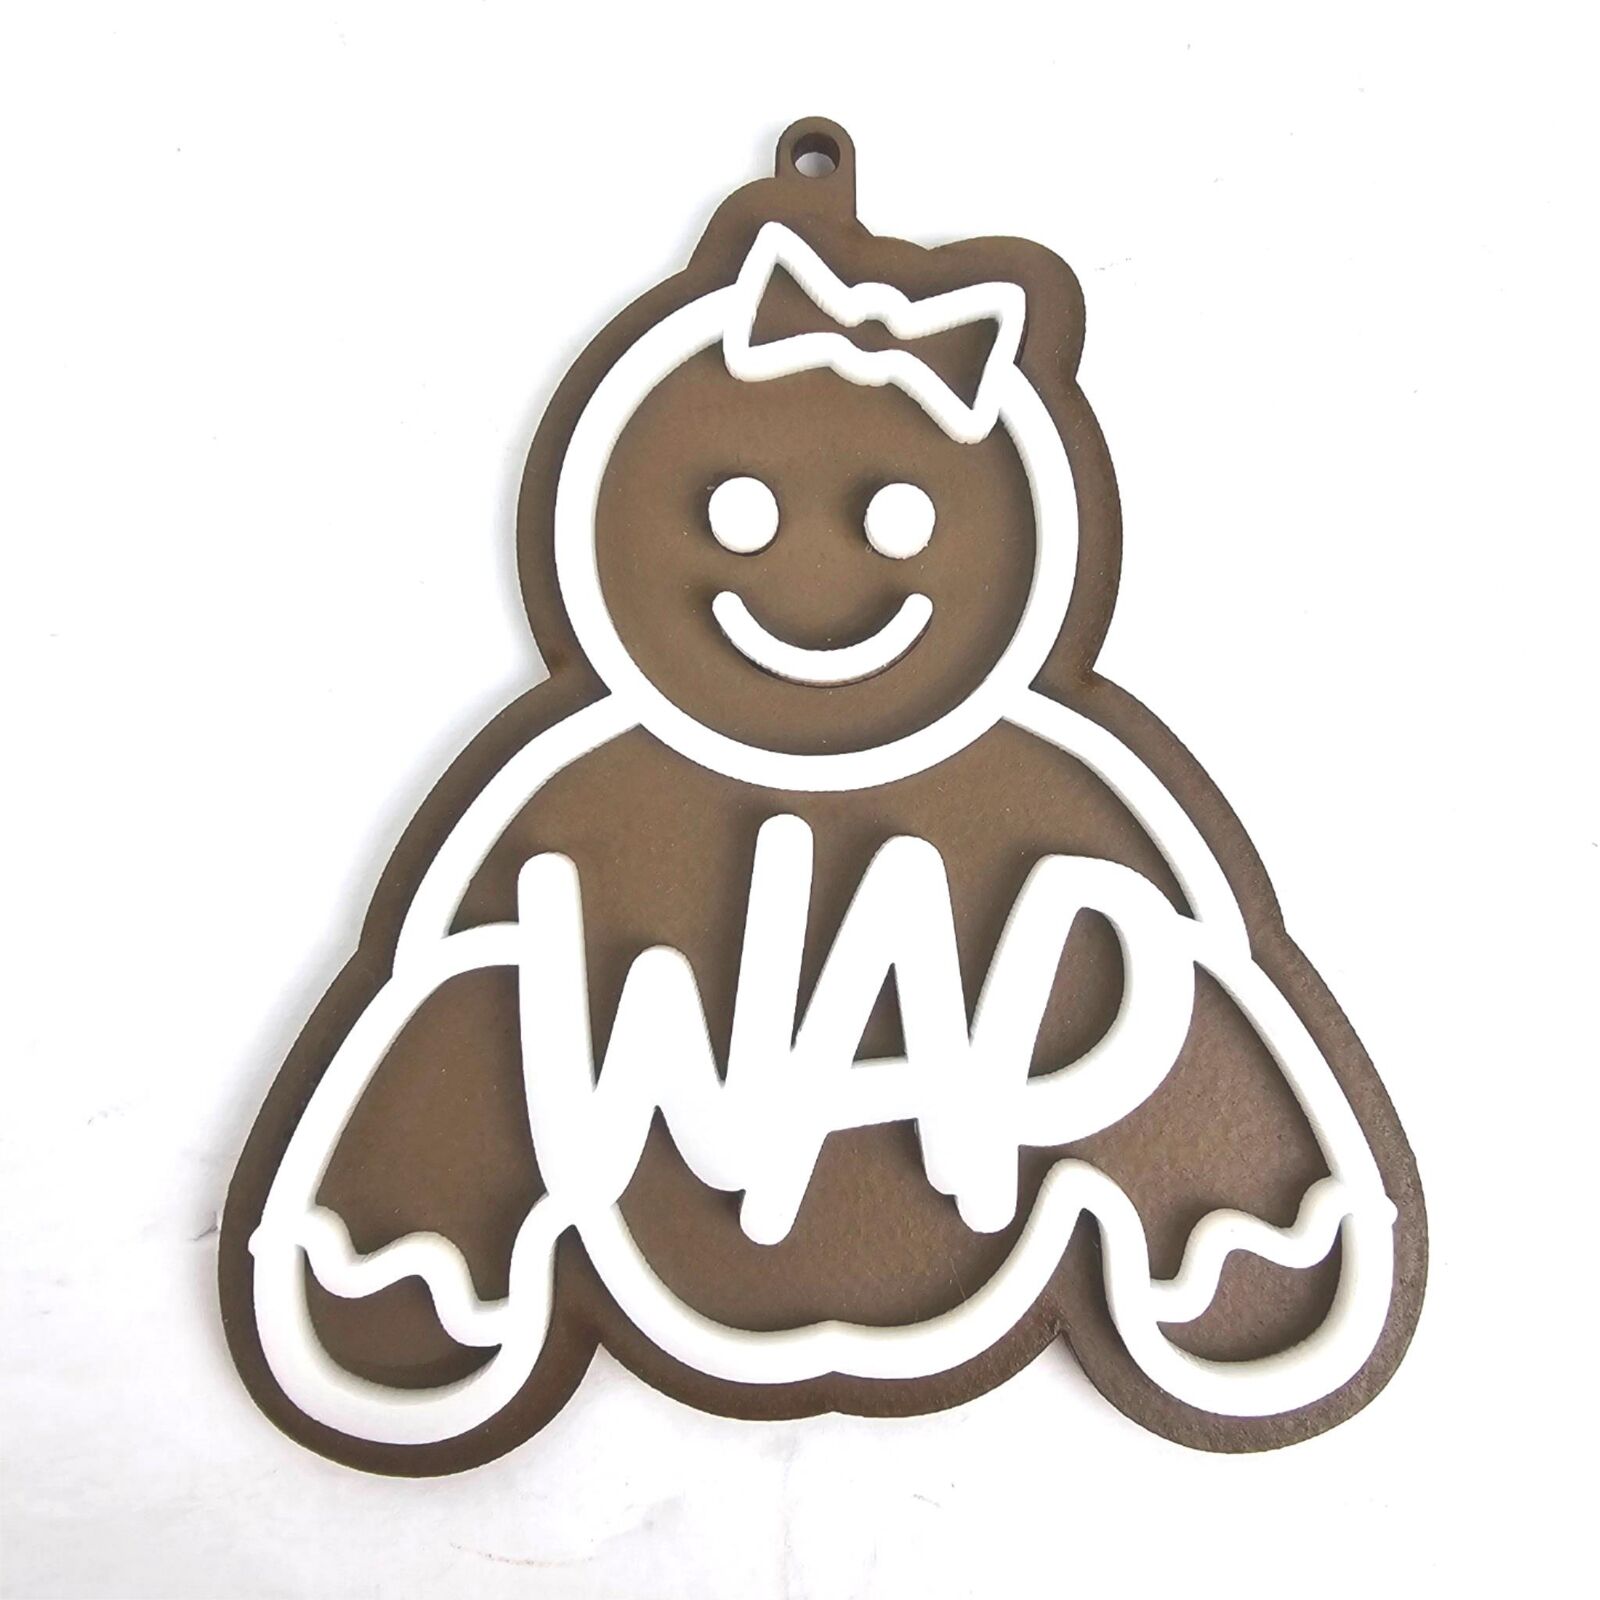 Naughty Gingerbread Cookie Christmas Ornament Adult Sexual WAP Wet Ass Pussy